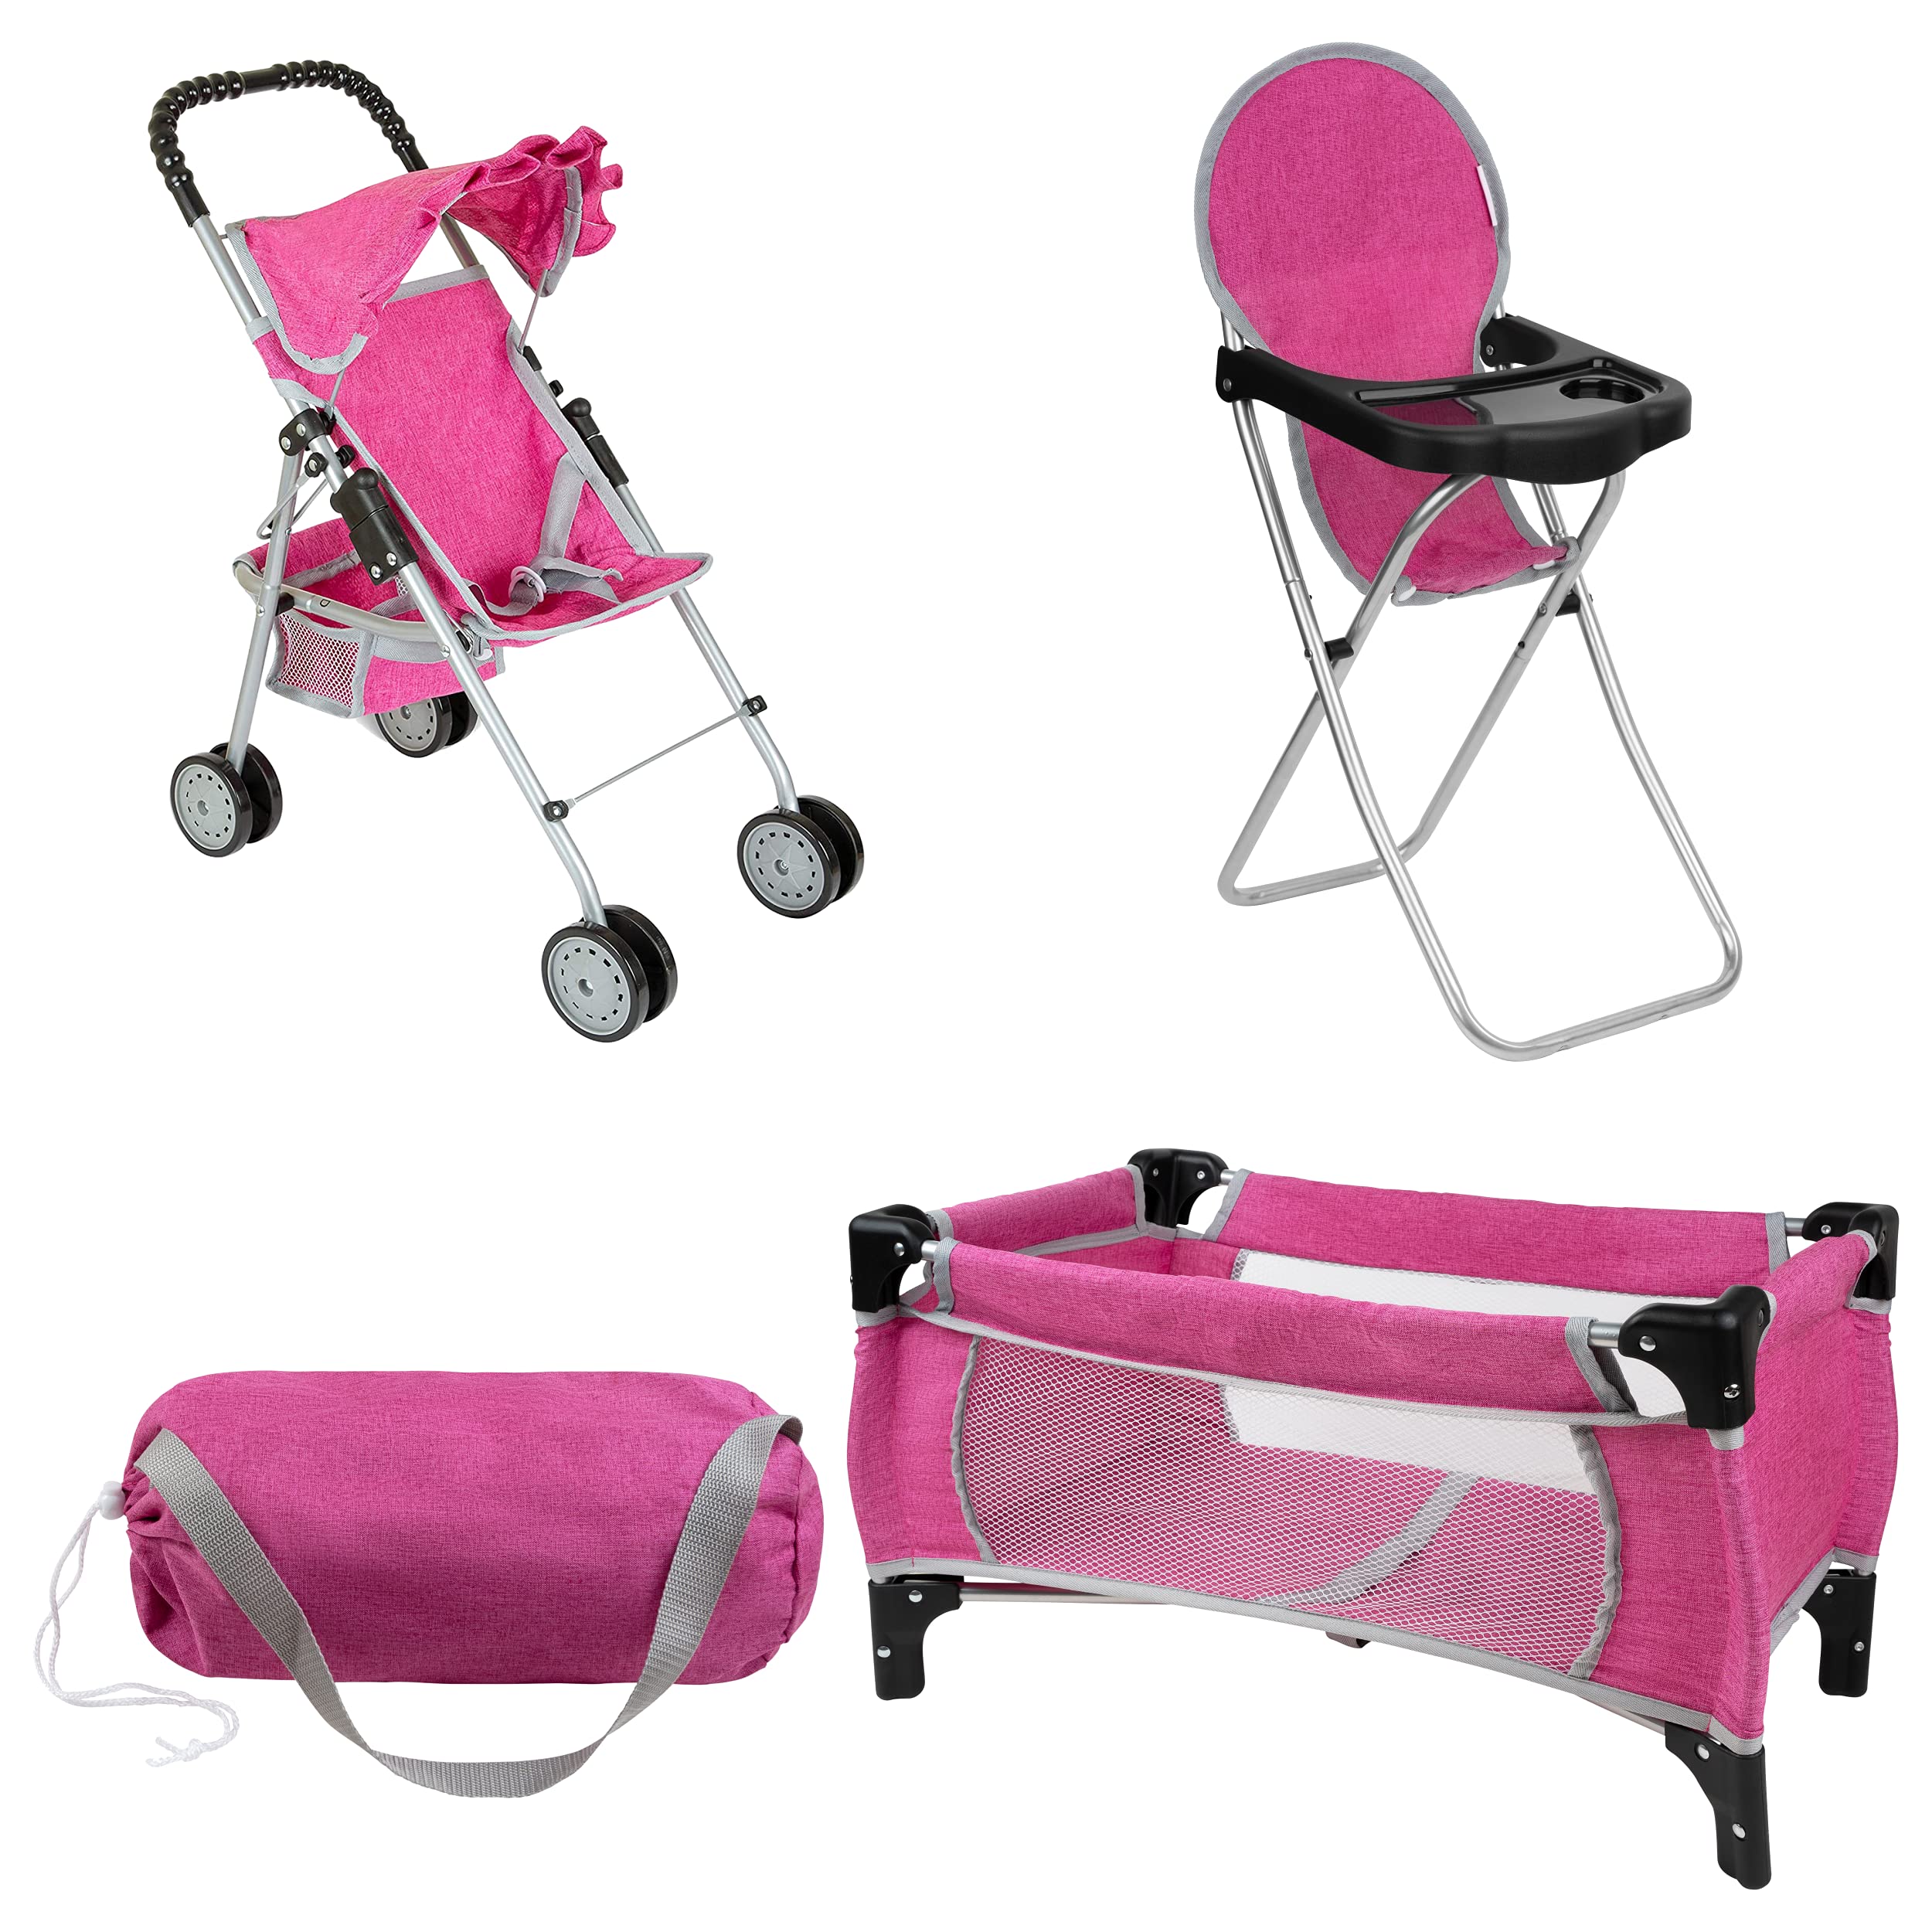 Fash N Kolor Doll Play Set 3 in 1 Doll Set, 1 Pack N Play, Doll Stroller, Doll High Chair Fits Up to 18'' Doll Denim Pink